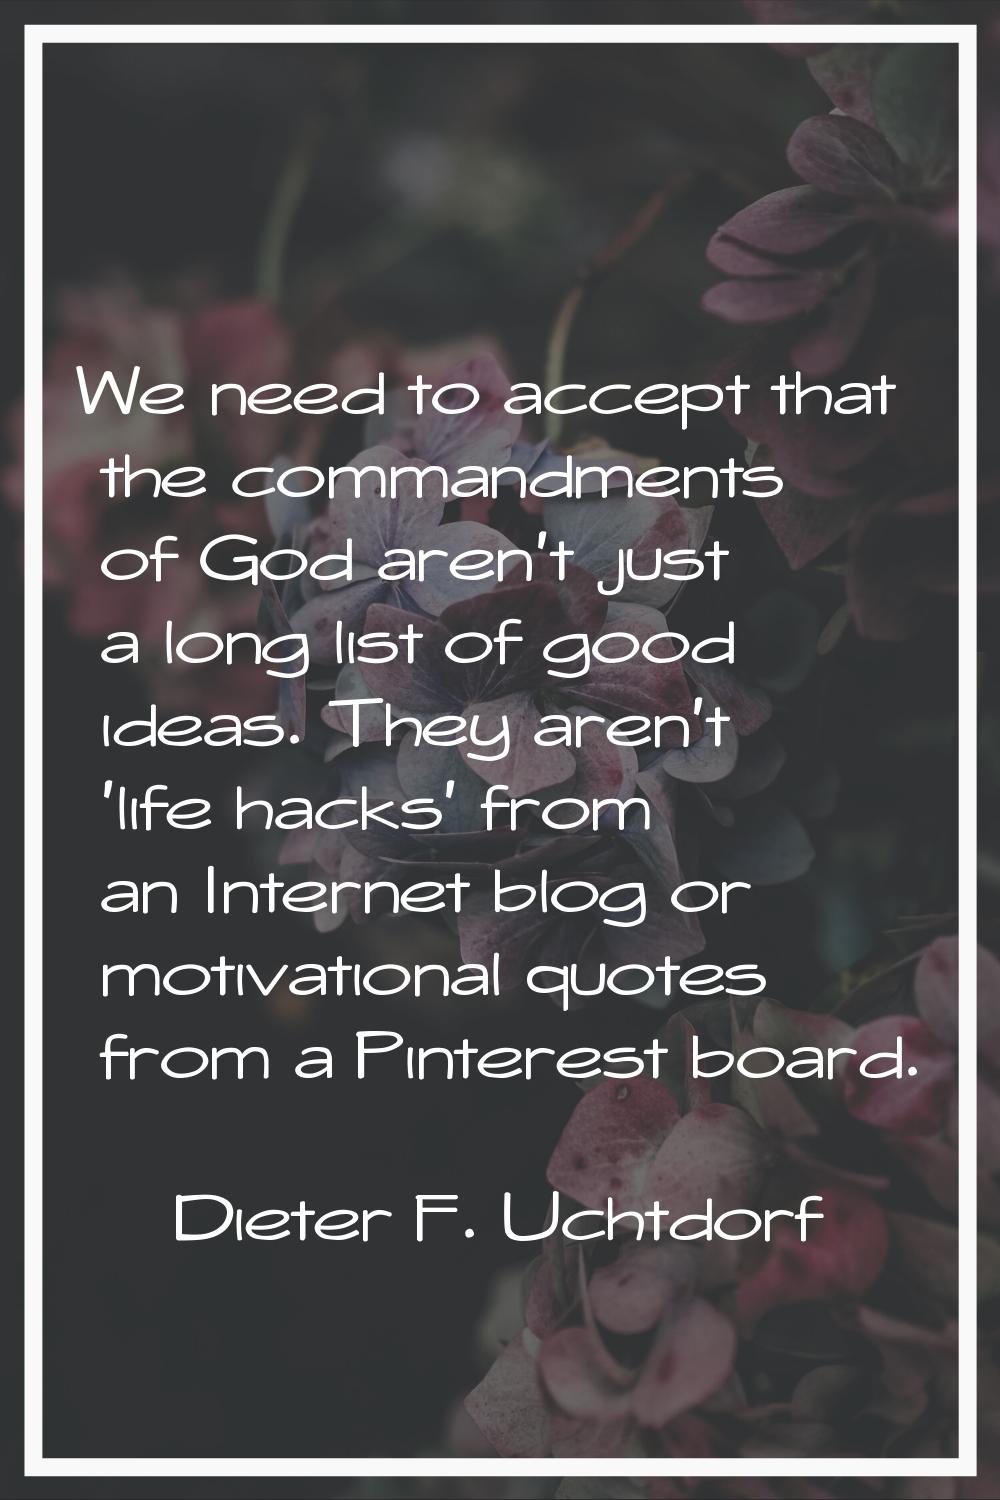 We need to accept that the commandments of God aren't just a long list of good ideas. They aren't '